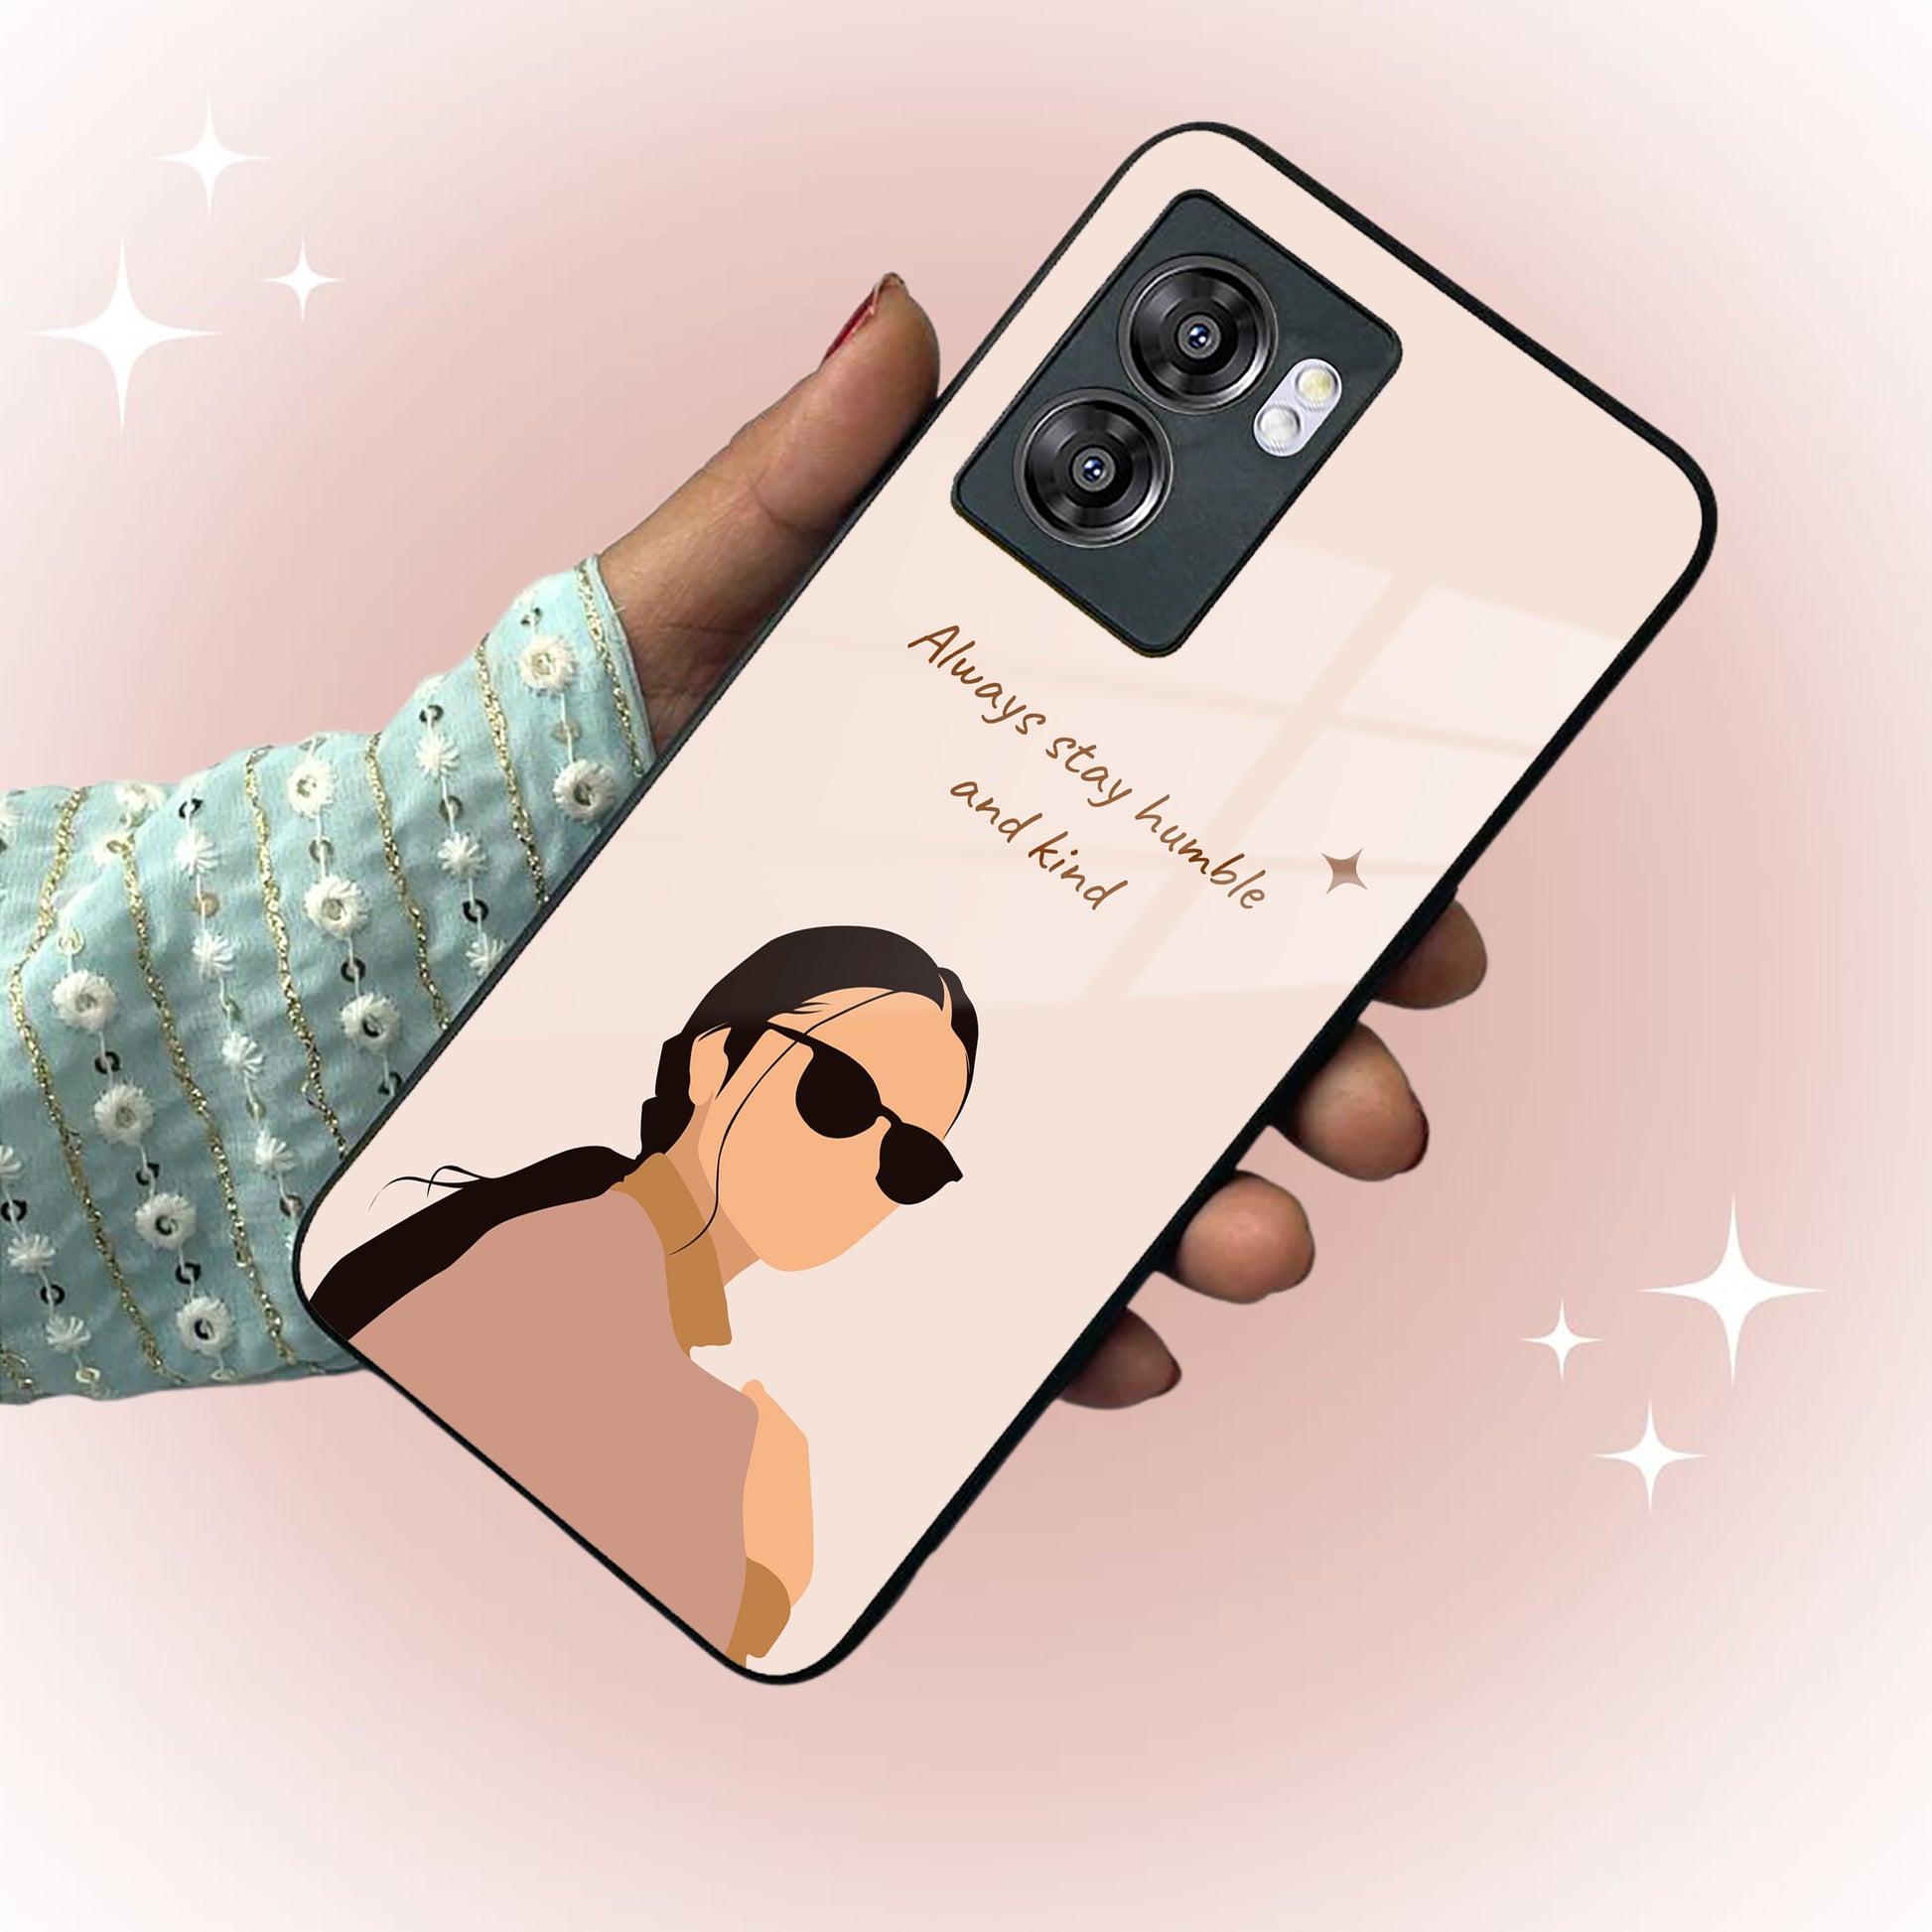 Always Stay Humble And Kind Glass Phone Cover for Oppo ShopOnCliQ